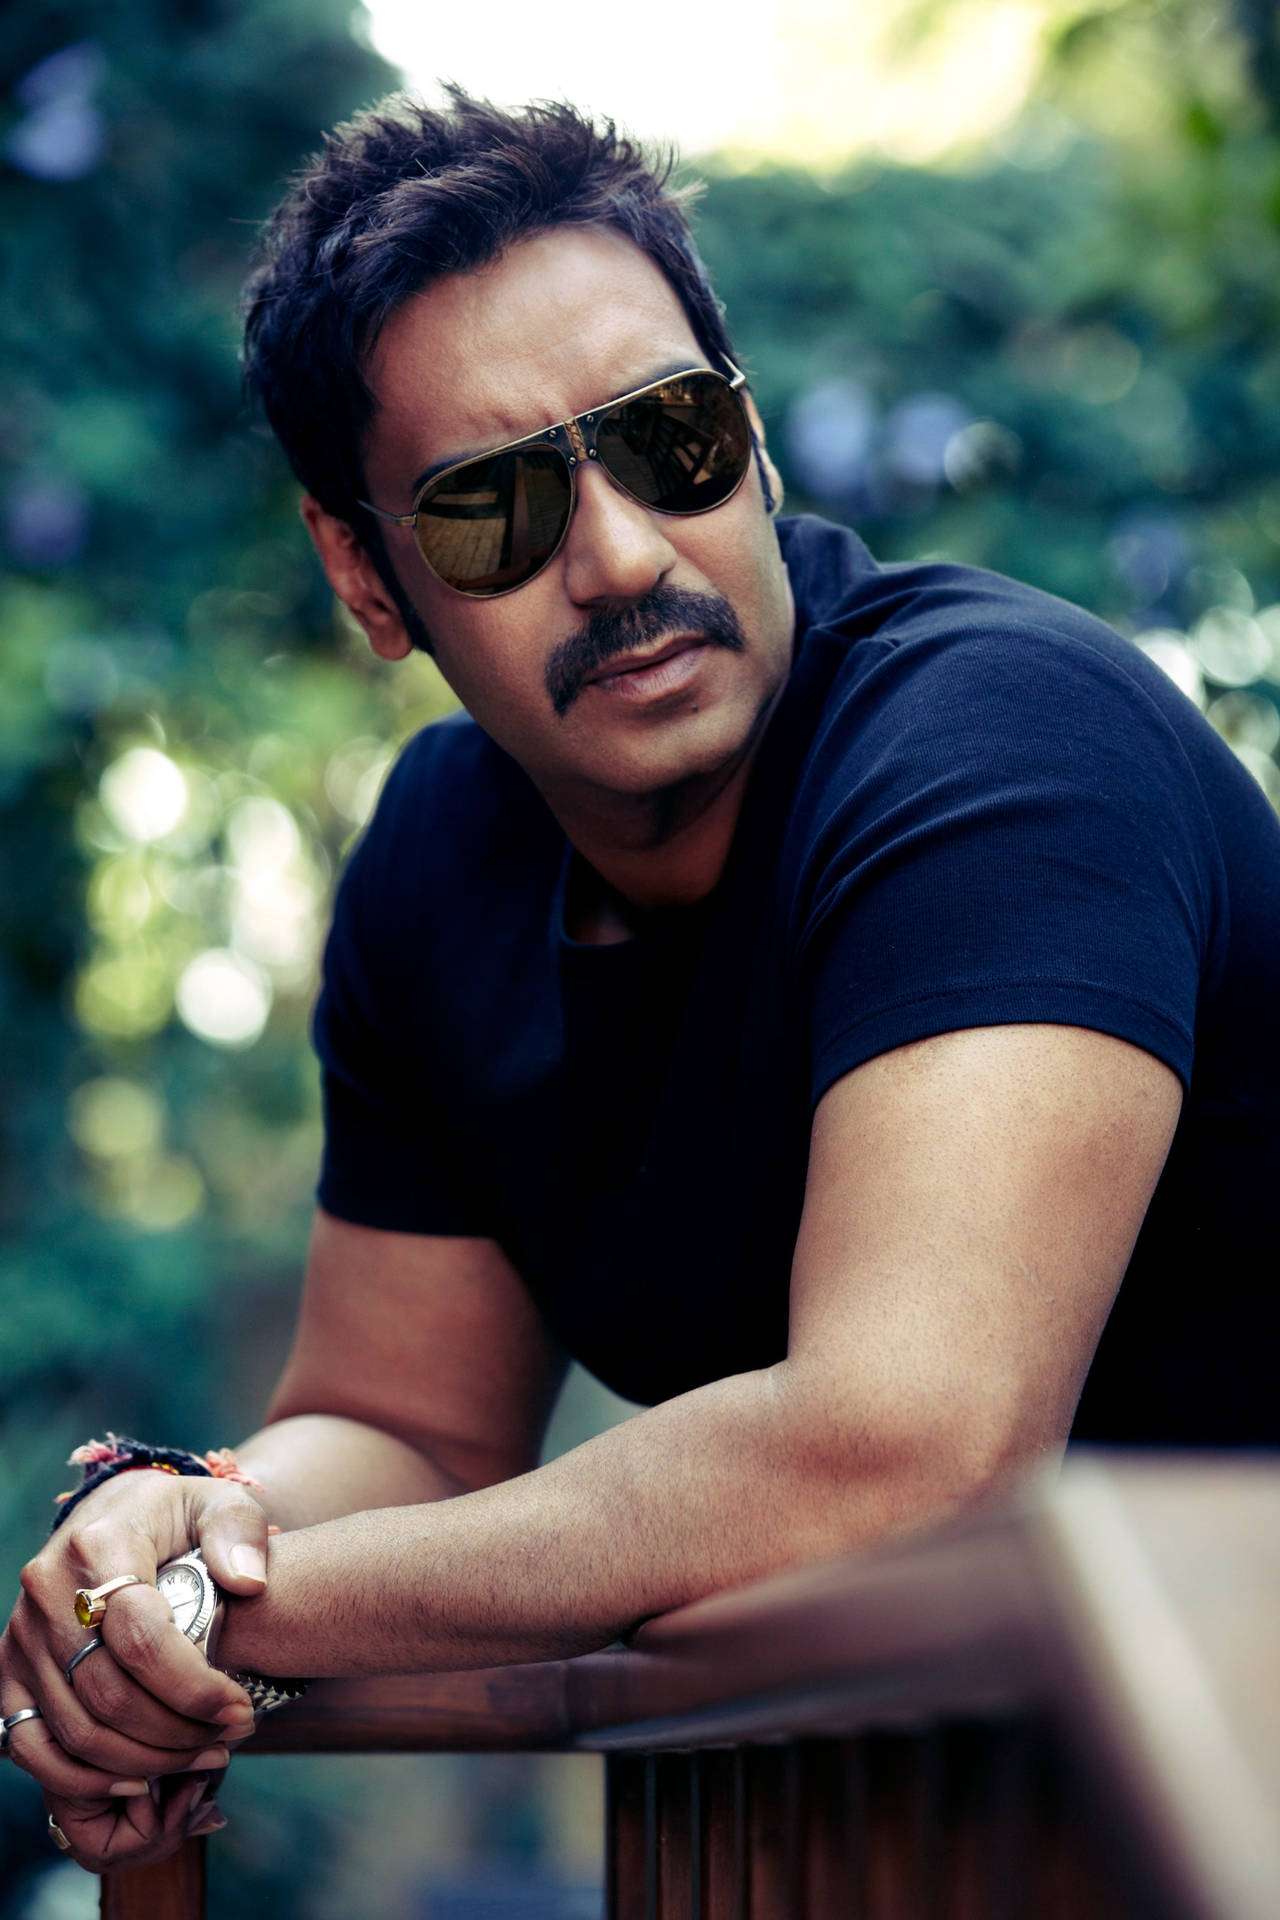 Top 999+ Ajay Devgn Wallpapers Full HD, 4K✅Free to Use